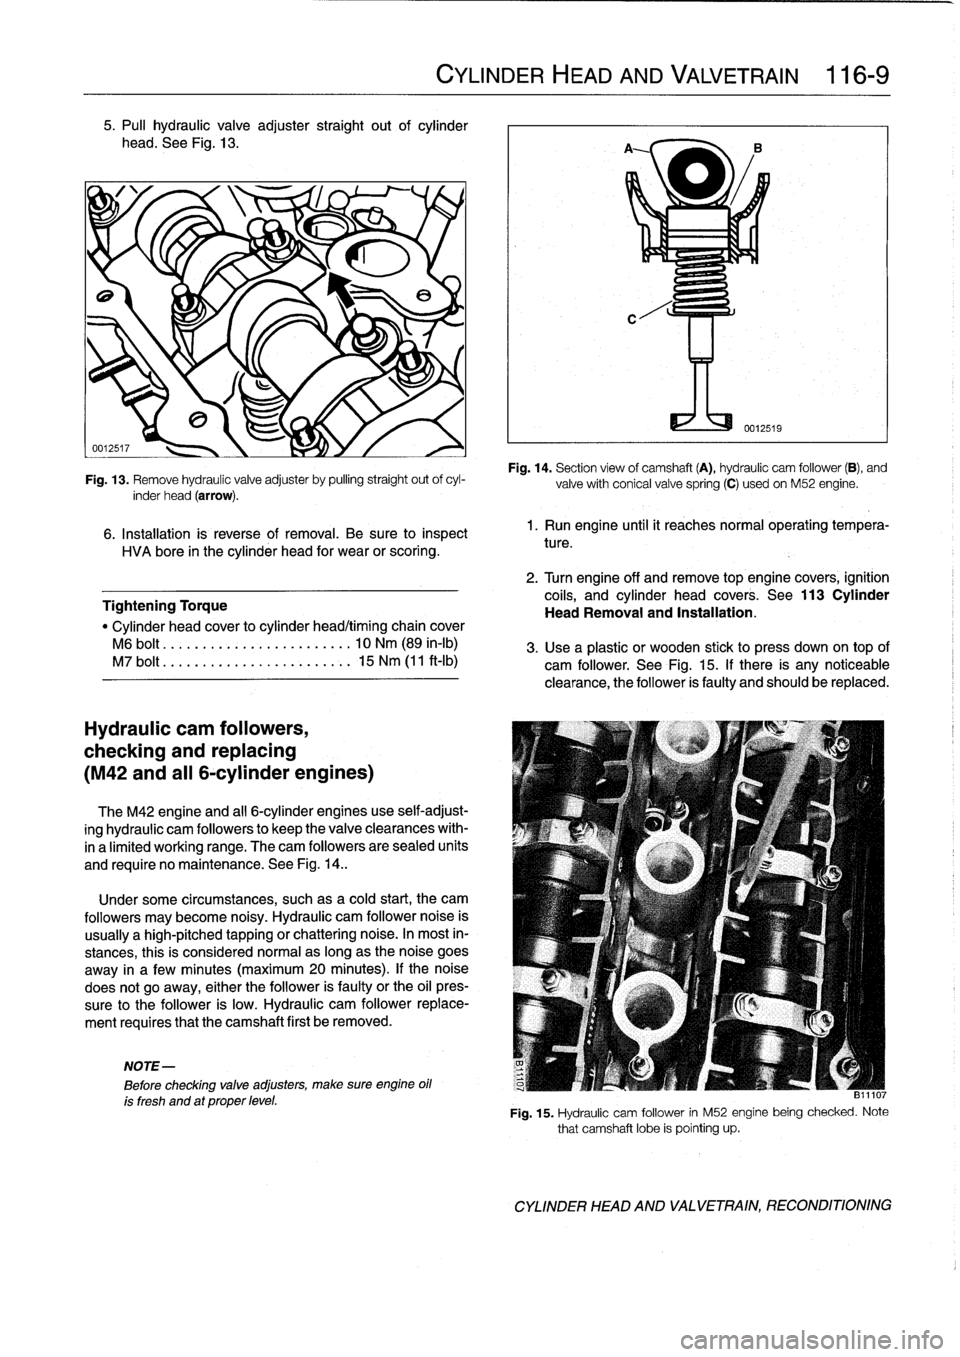 BMW 318i 1997 E36 Owners Manual 5
.
Pull
hydraulic
valve
adjuster
straight
out
of
cylinder

head
.
See
Fig
.
13
.

Fig
.
13
.
Remove
hydraulic
valve
adjuster
by
pulling
straight
out
ofcyl-
inder
head
(arrow)
.

6
.
Installation
is
r